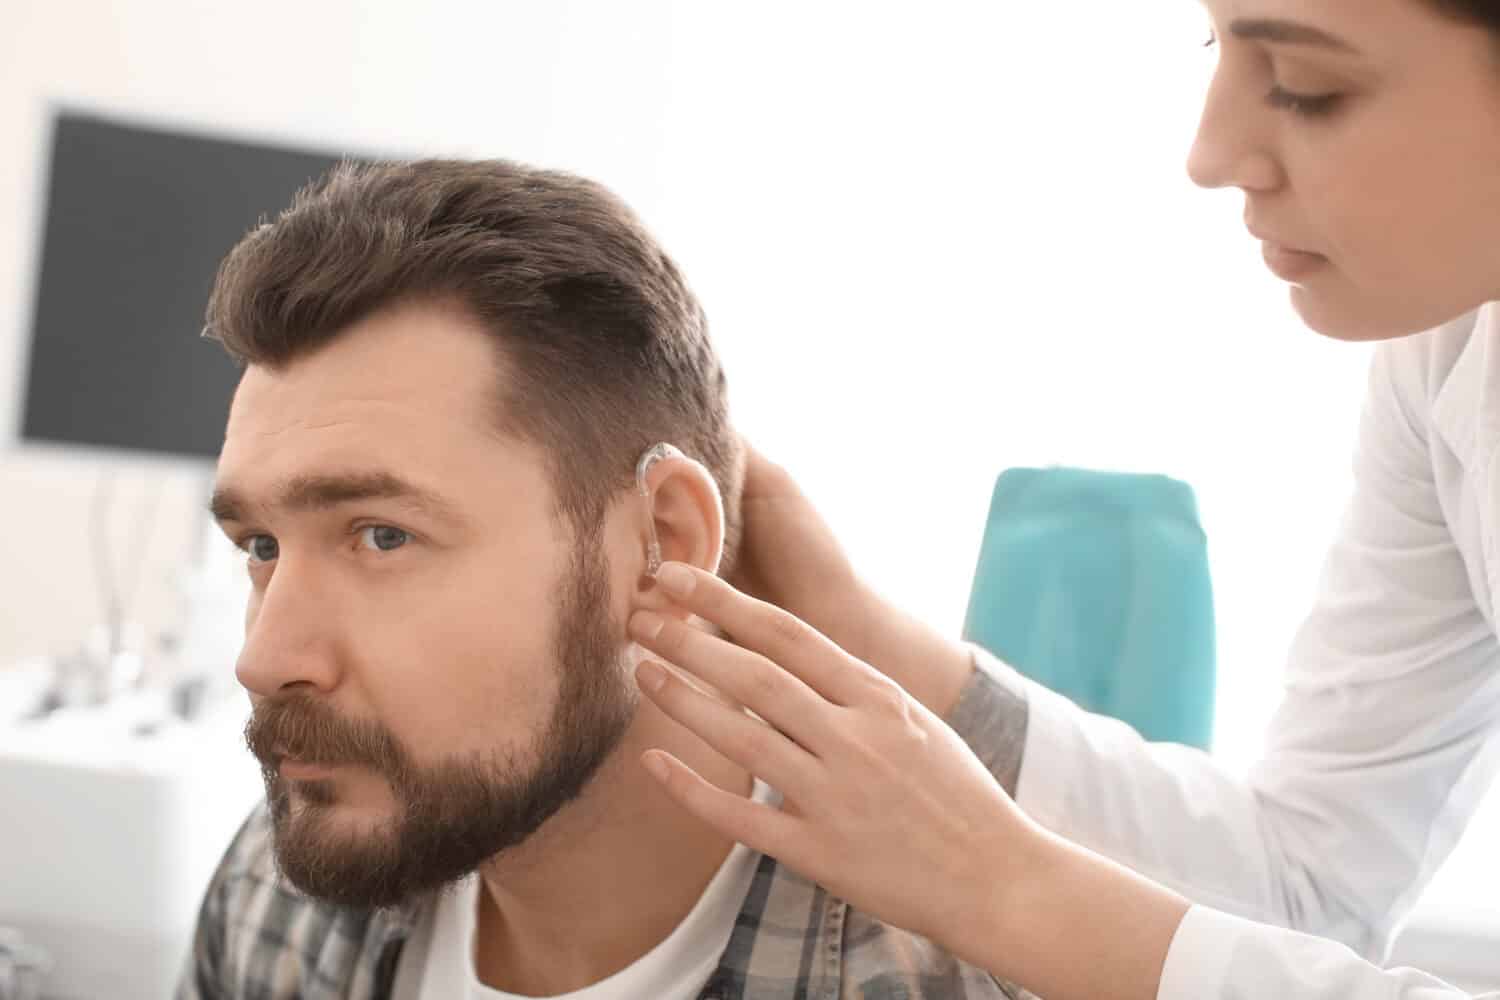 Man being fitted with a hearing aid by a woman hearing aid expert.